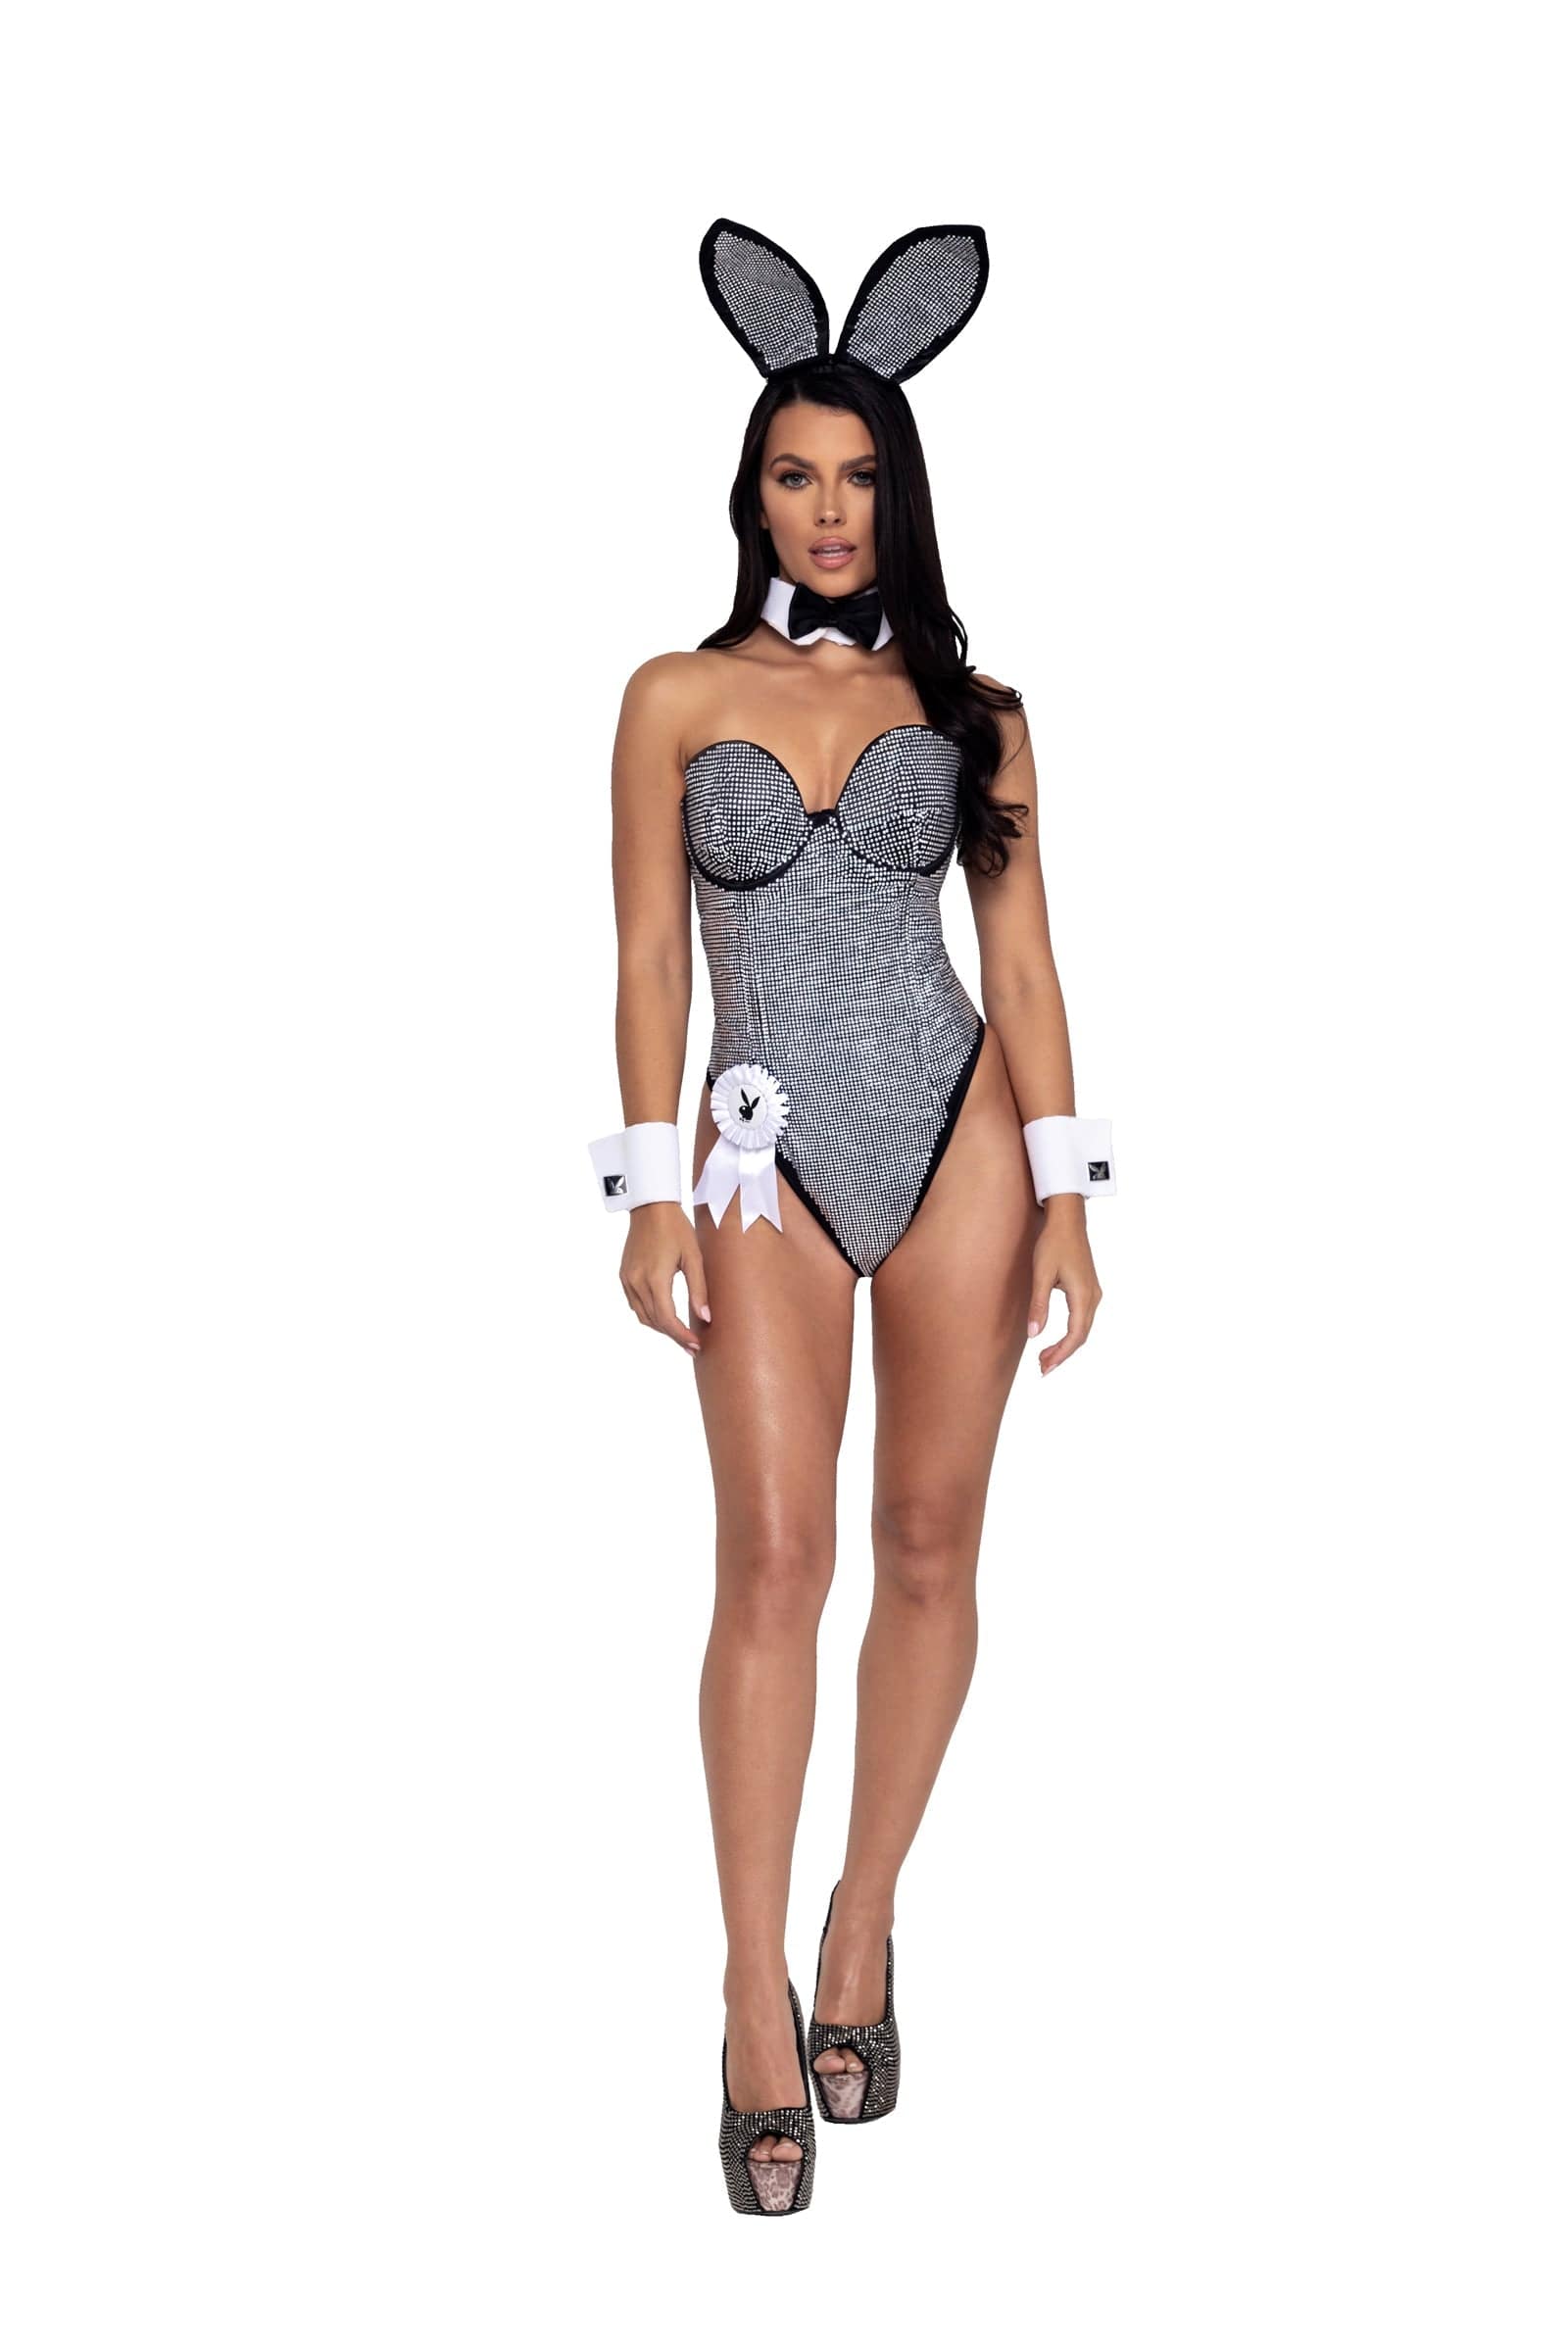 Roma 8pc Playboy Rhinestone Bunny Cosplay Costume 2023 3pc After Hours Playboy Cosplay Roma Costume PB149 Apparel & Accessories > Costumes & Accessories